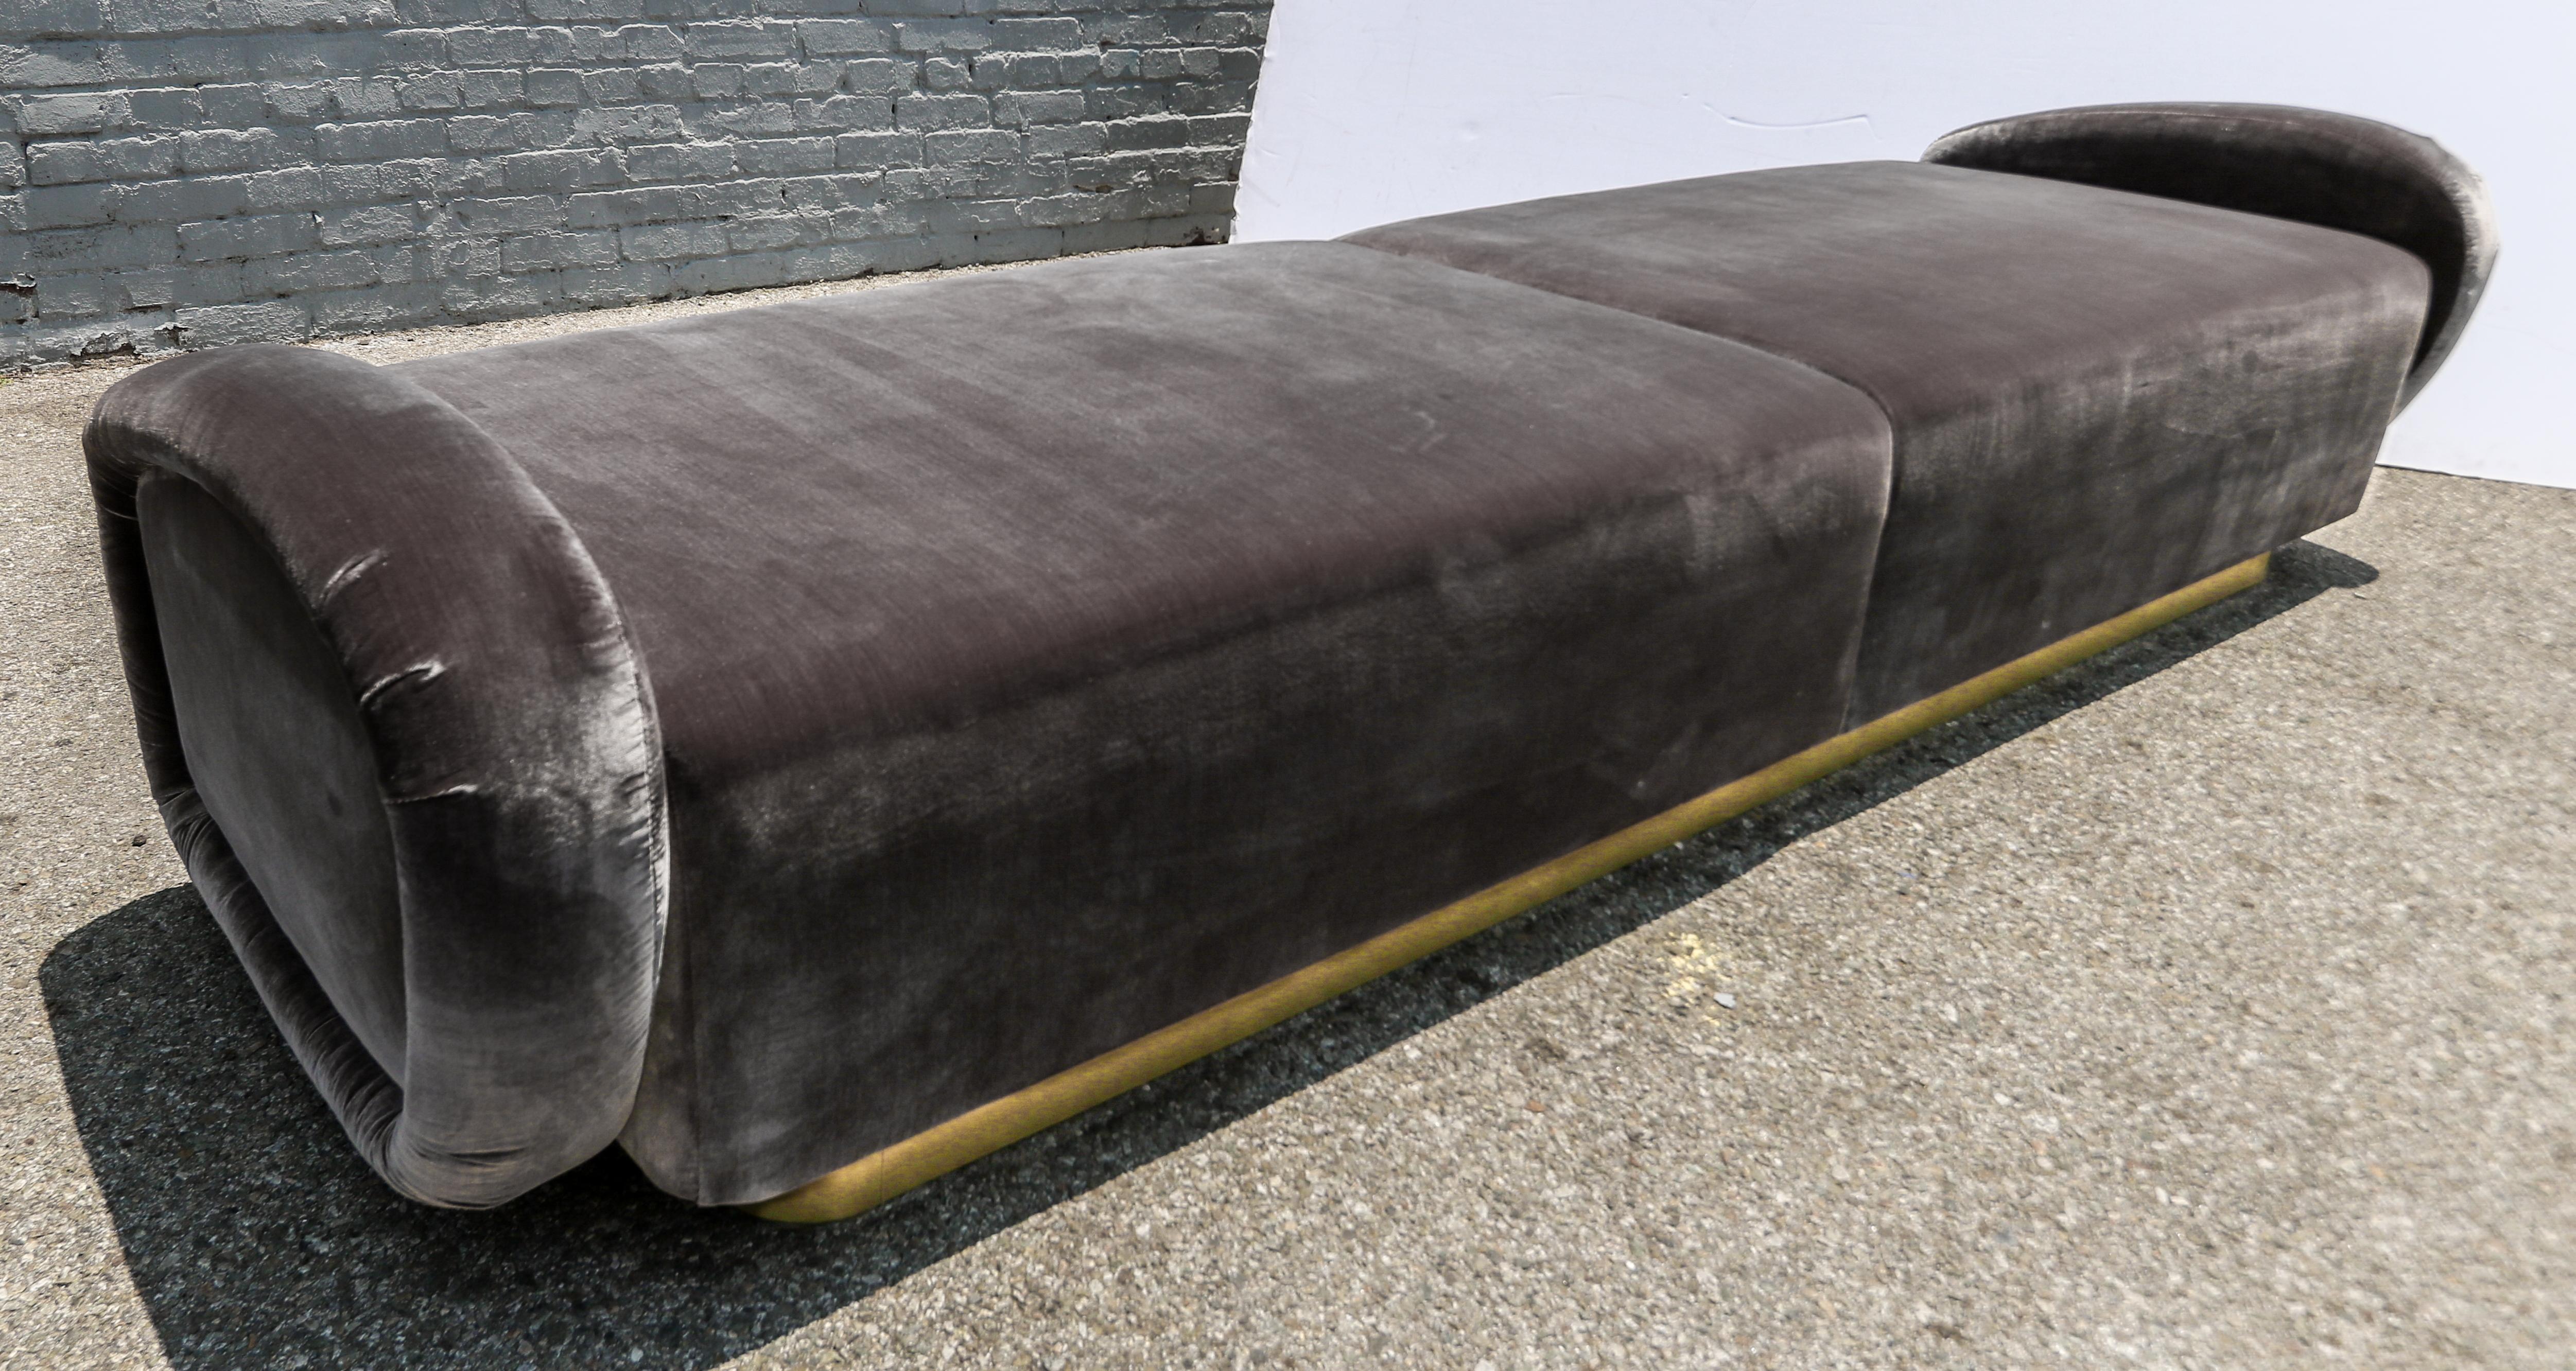 Custom 1960s Italian style sofa or bench with handmade brass base upholstered in grey silk velvet.  Made in Los Angeles by Adesso Imports. Can be done in different sizes, fabrics and colors.